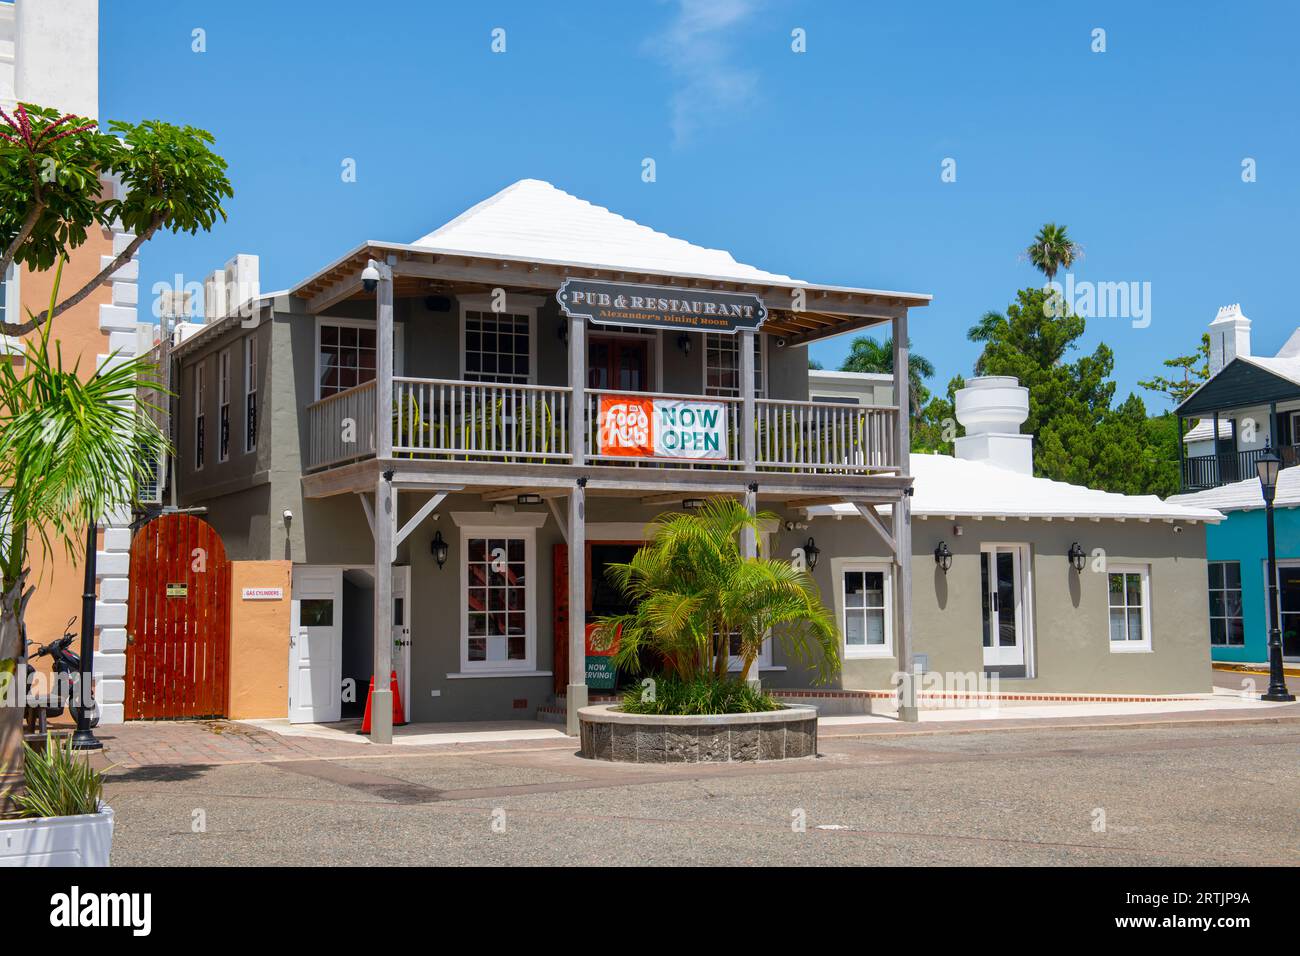 Alexander's Restaurant at King's Square in St. George's town center in Bermuda. Historic Town of St. George is a World Heritage Site since 2000. Stock Photo